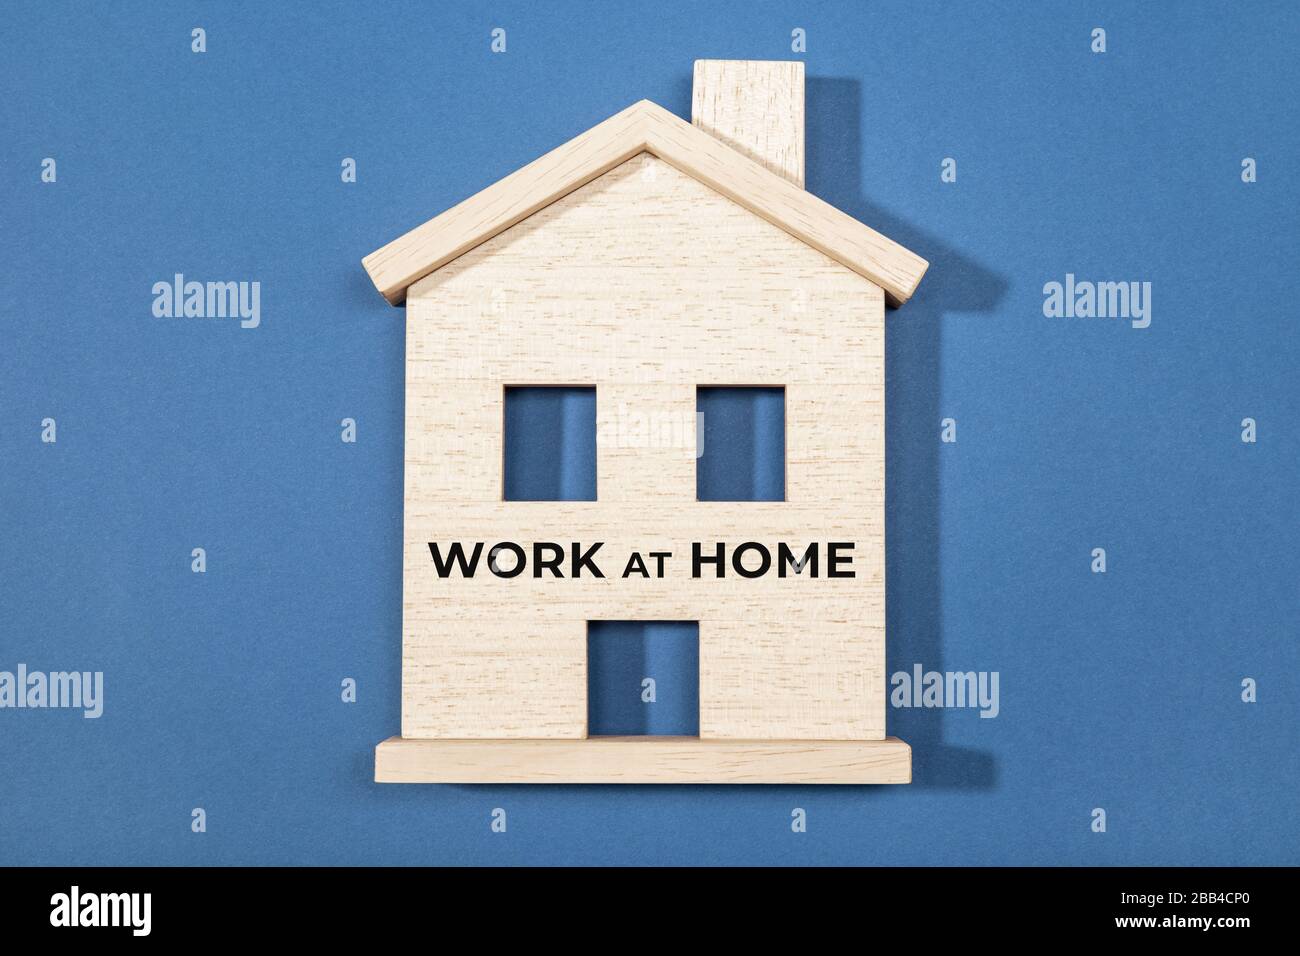 Work at home concept. Wooden house icon isolated on blue background Stock Photo